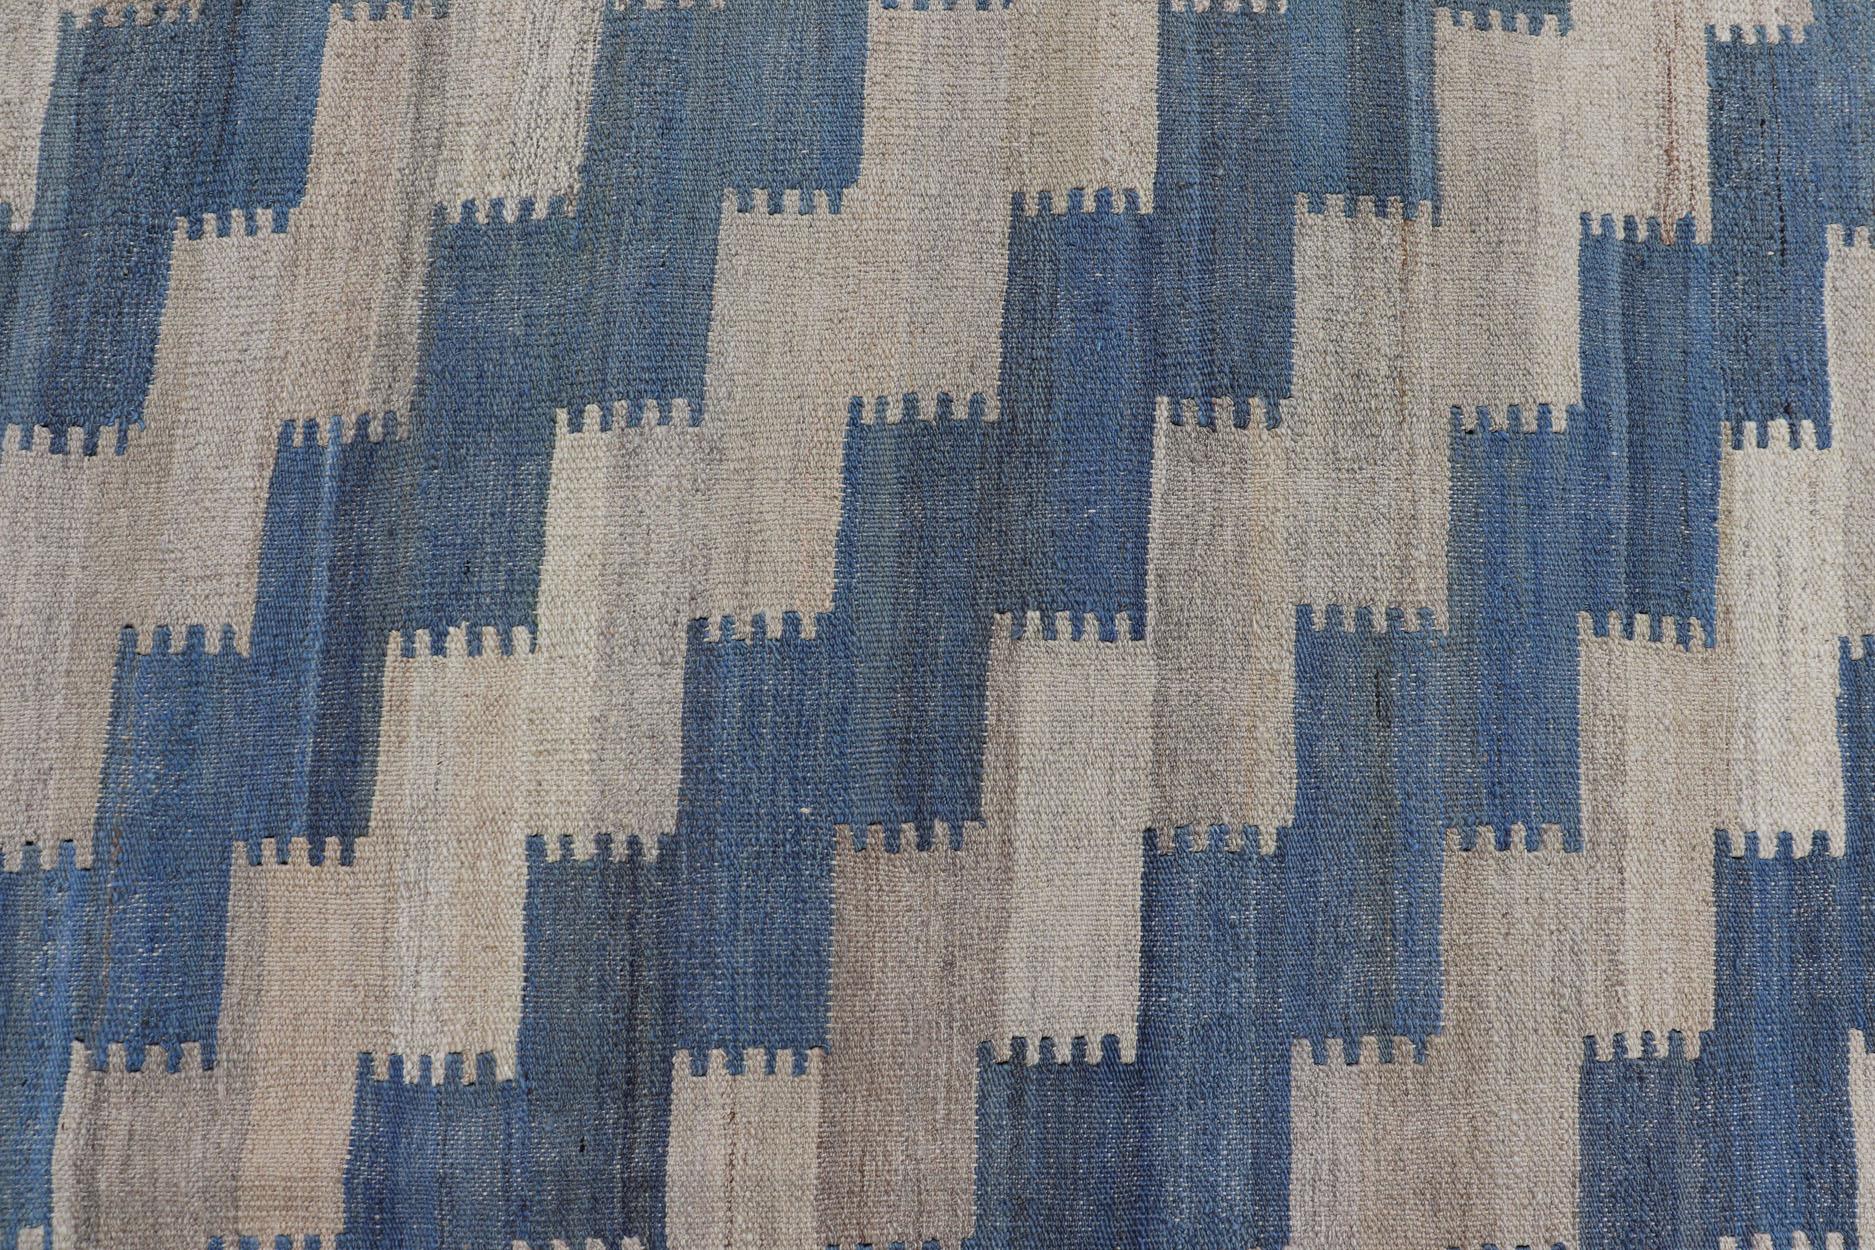 Flat-Weave Kilim Rug with a Modern Design in Blue, and Creams For Sale 2